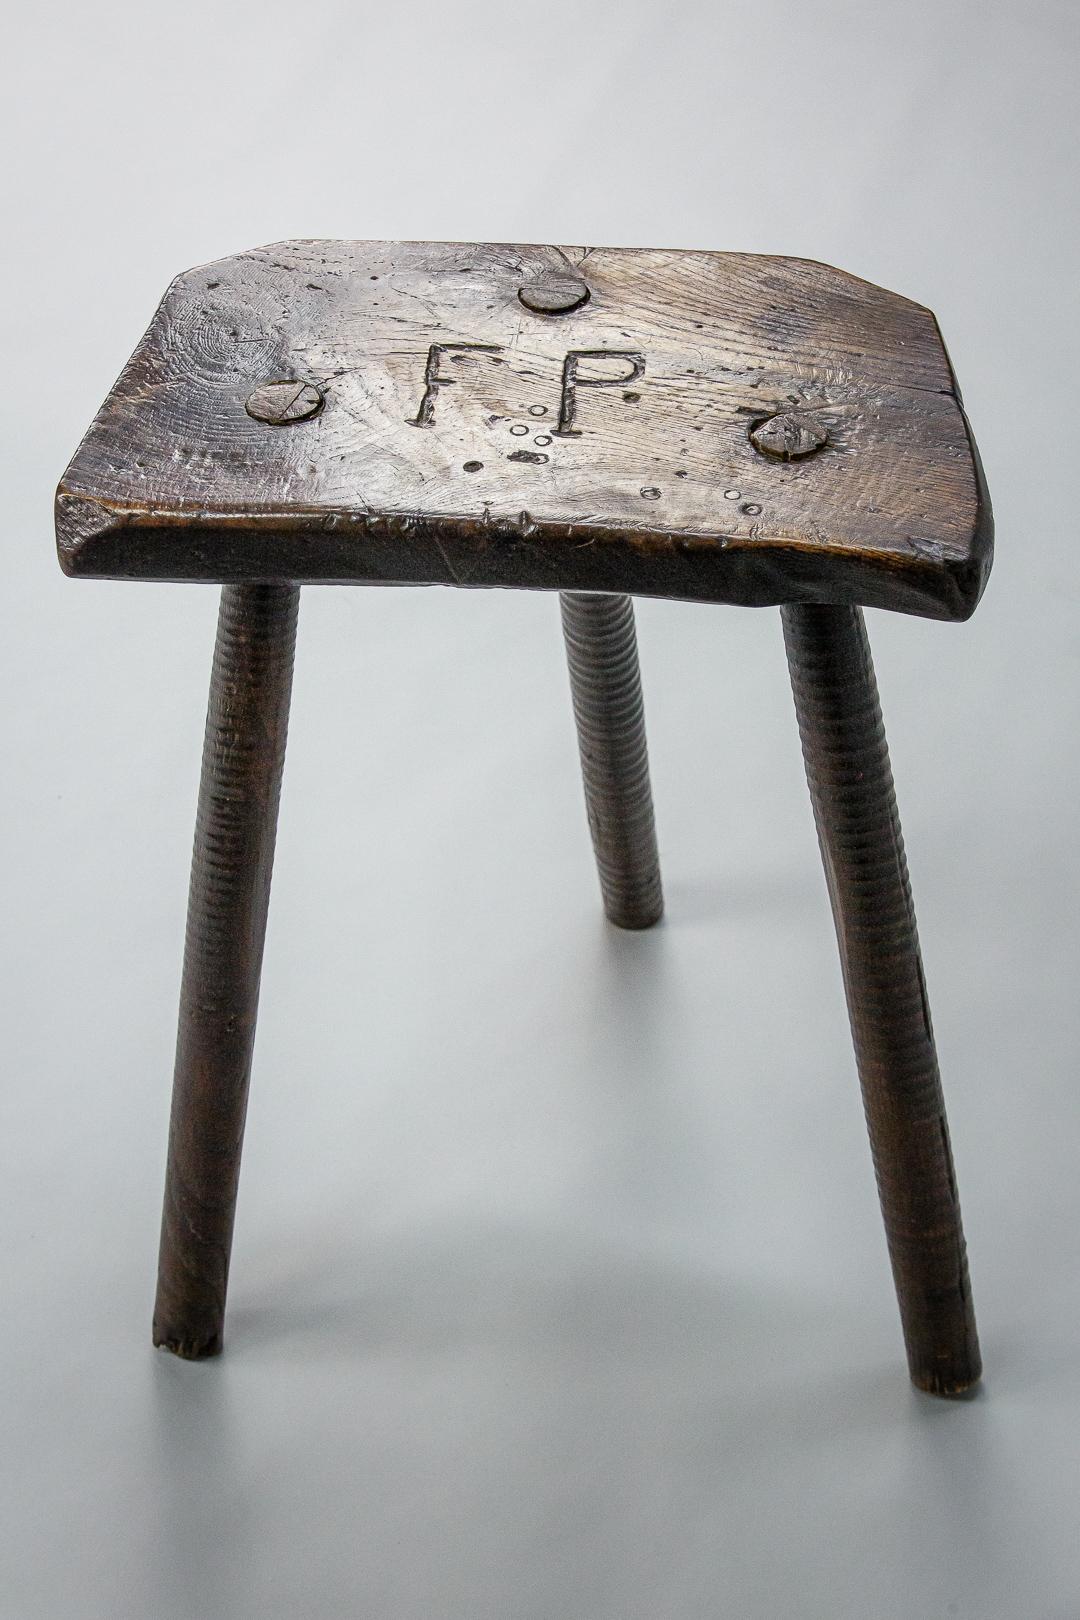 19th Century English Cutlers Stool Initialed 